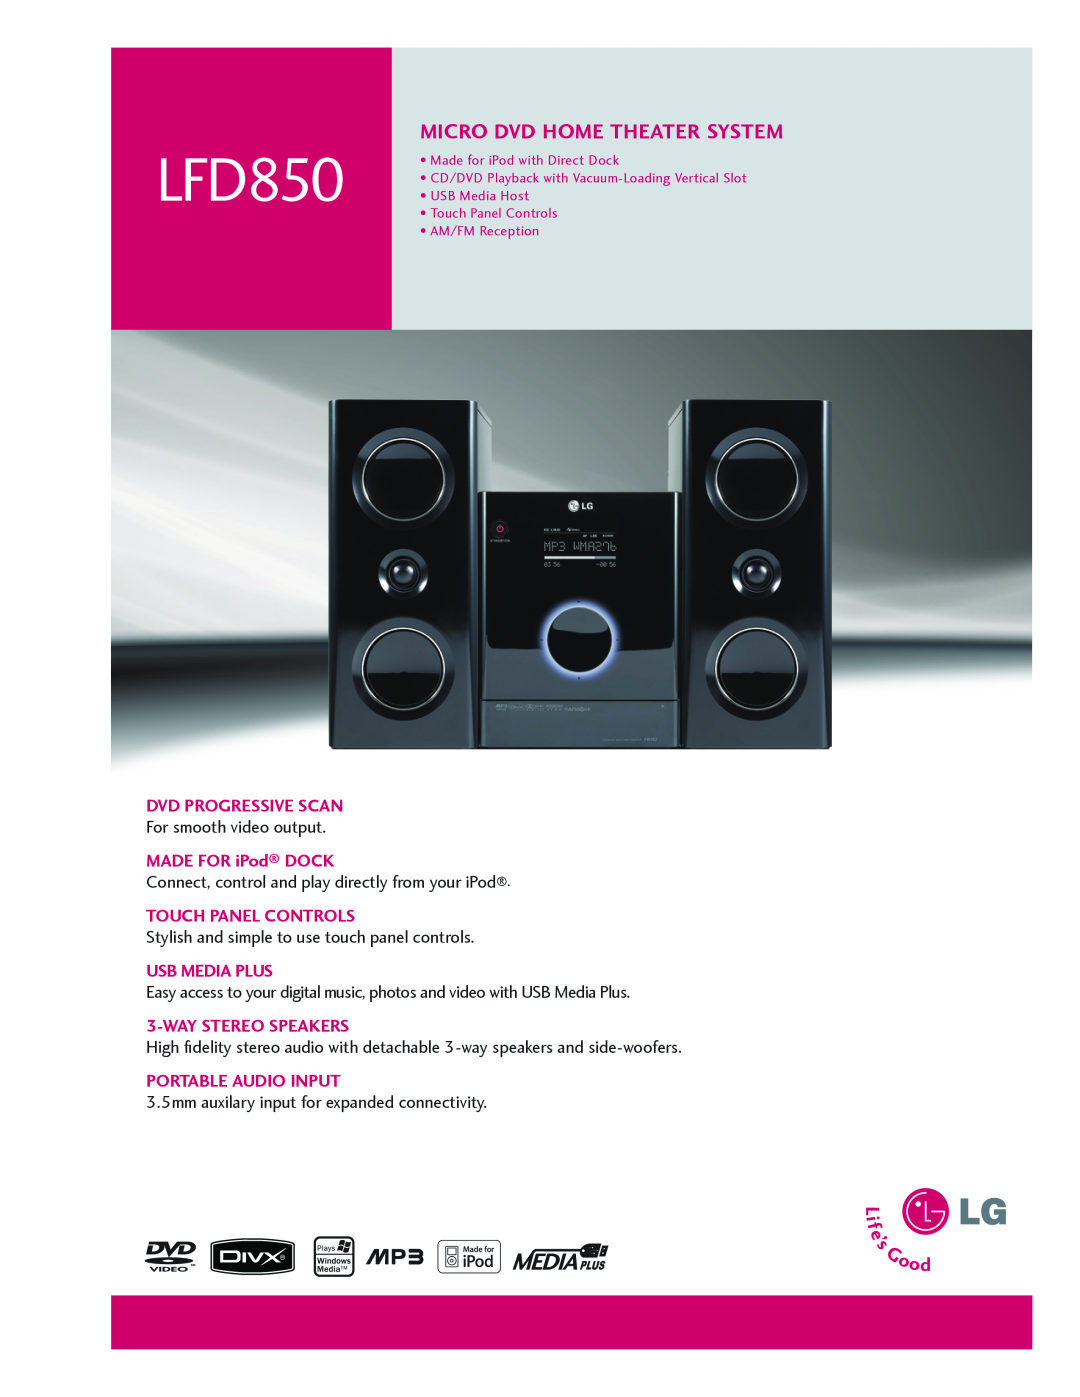 LG Electronics LFD850 manual Micro DVD Home Theater System, Dvd Progressive Scan, Made for iPod Dock, Touch Panel Controls 